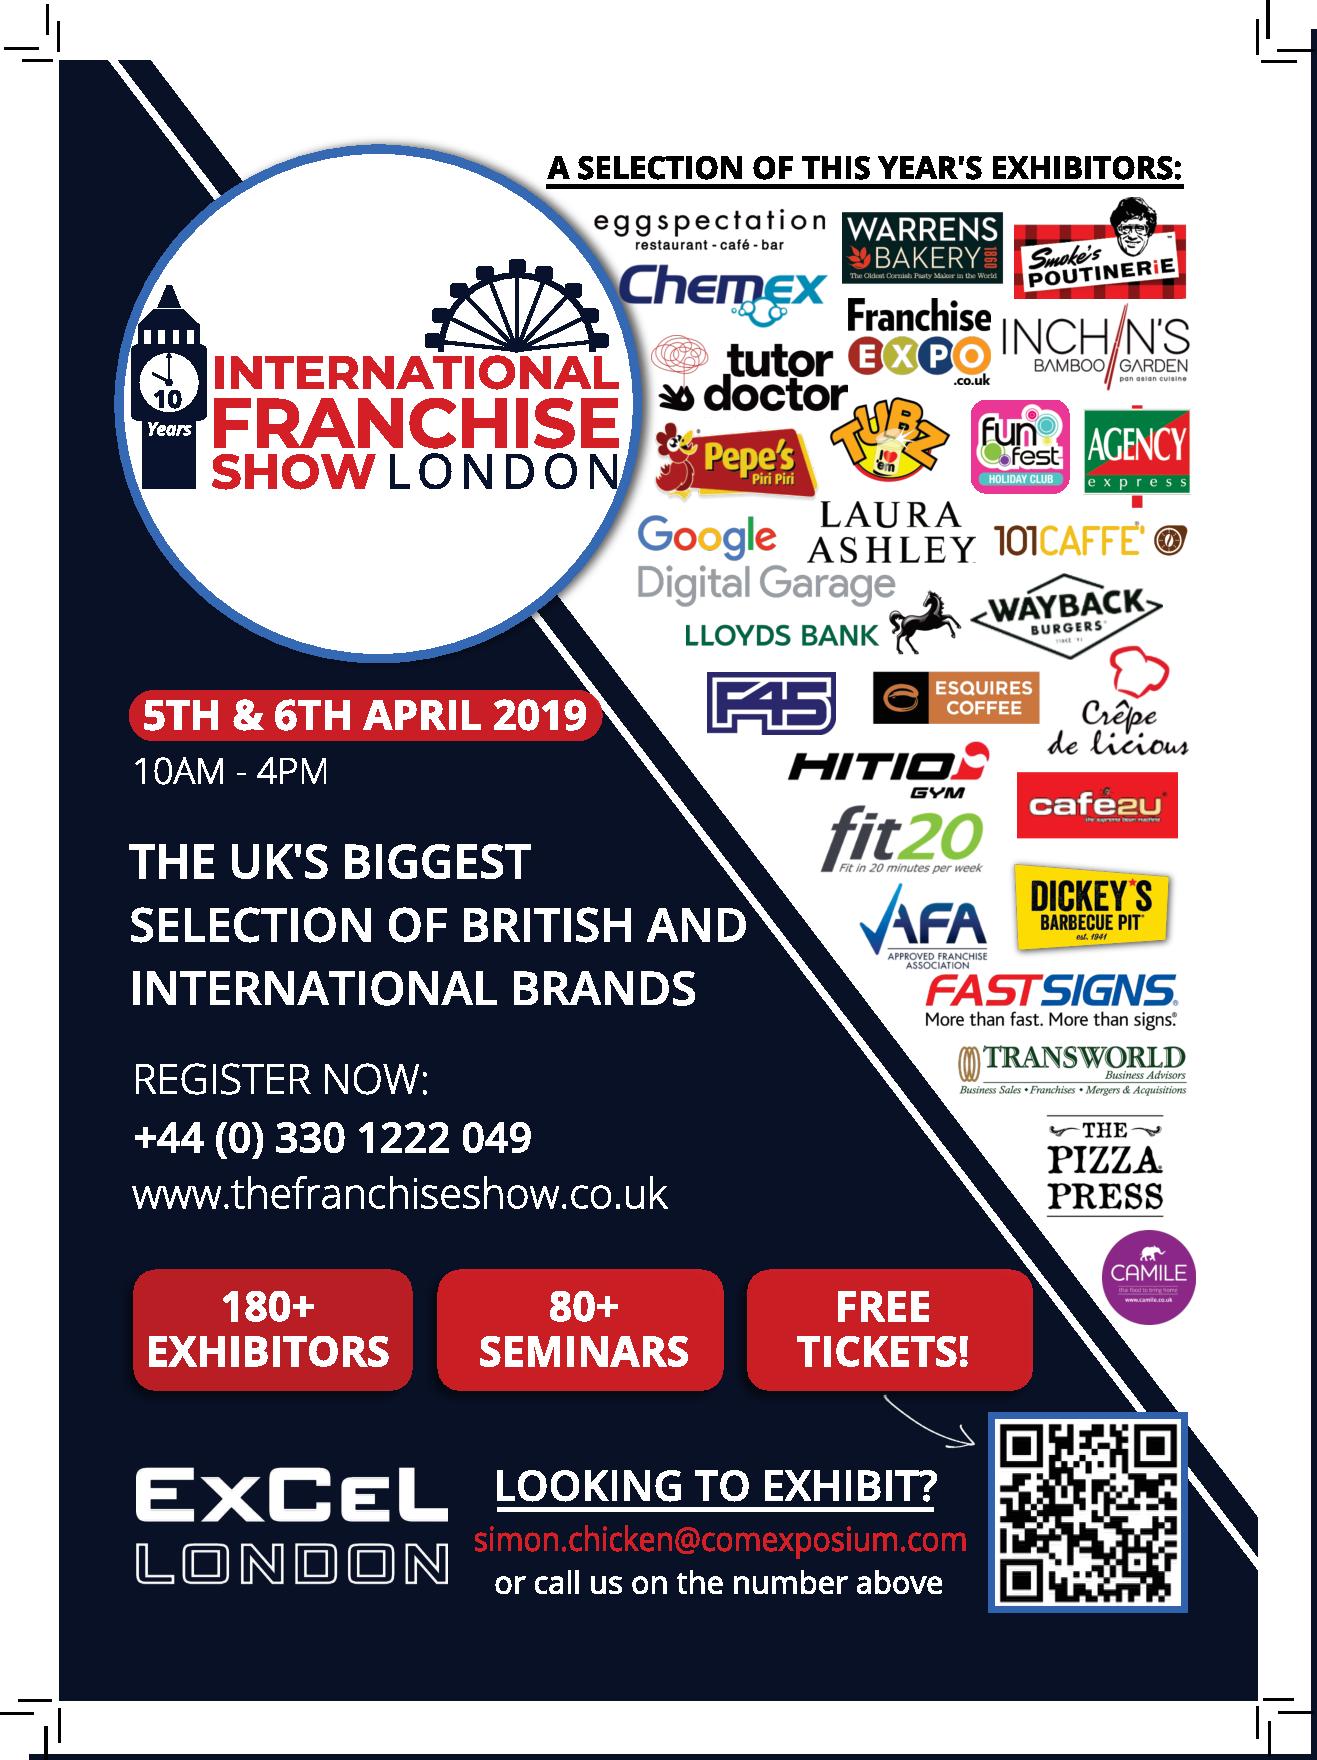 Are You Attending The International Franchise Show London 2019?